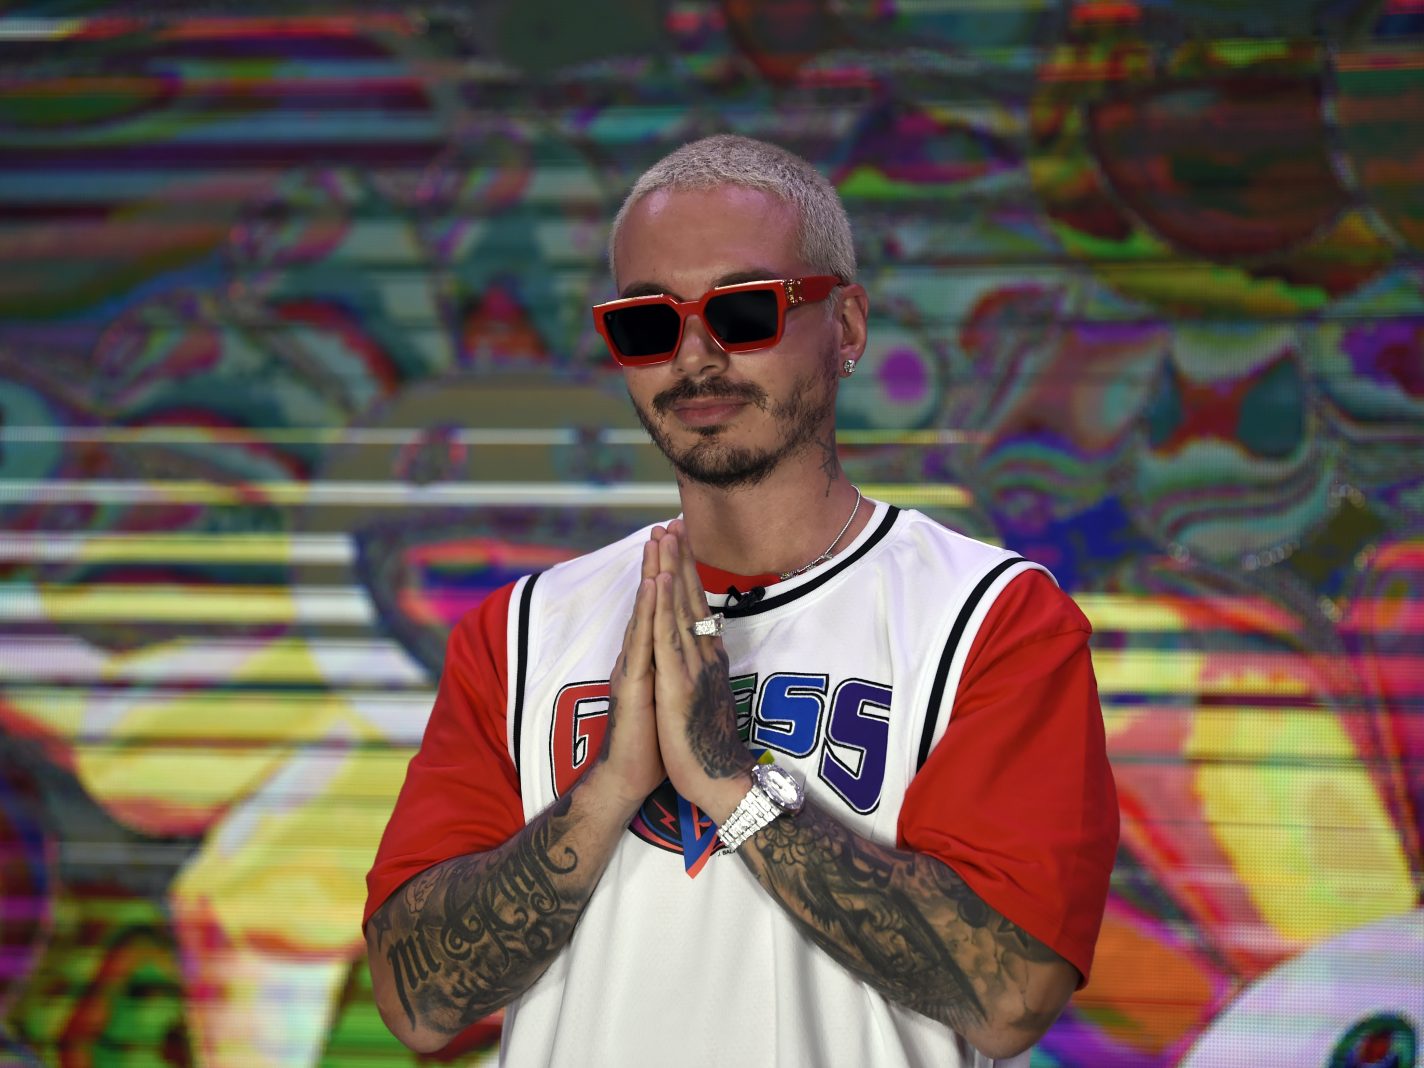 The Grammys Don't Value Us: J Balvin Posts Cryptic Tweet